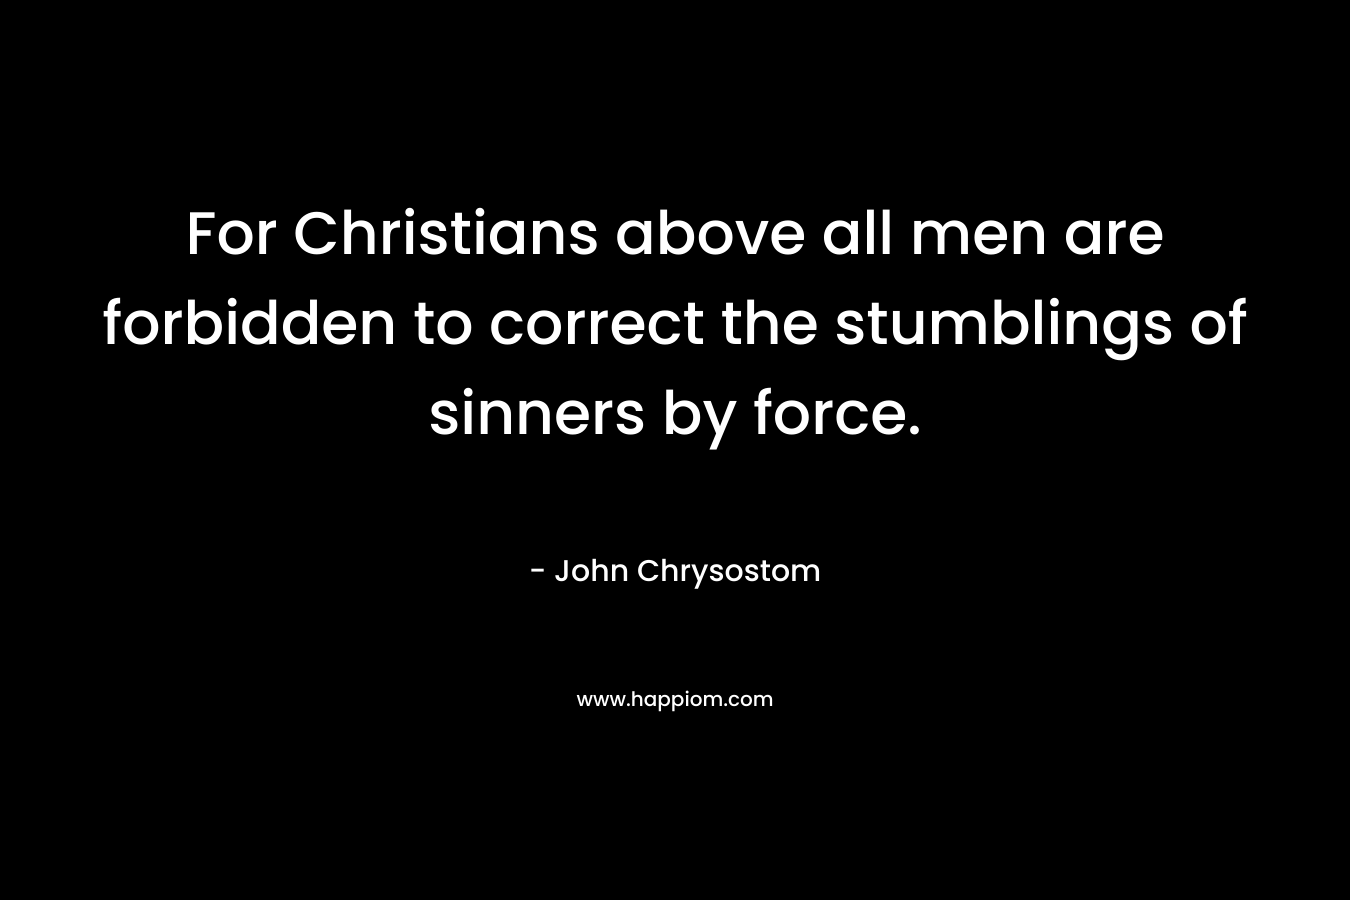 For Christians above all men are forbidden to correct the stumblings of sinners by force. – John Chrysostom